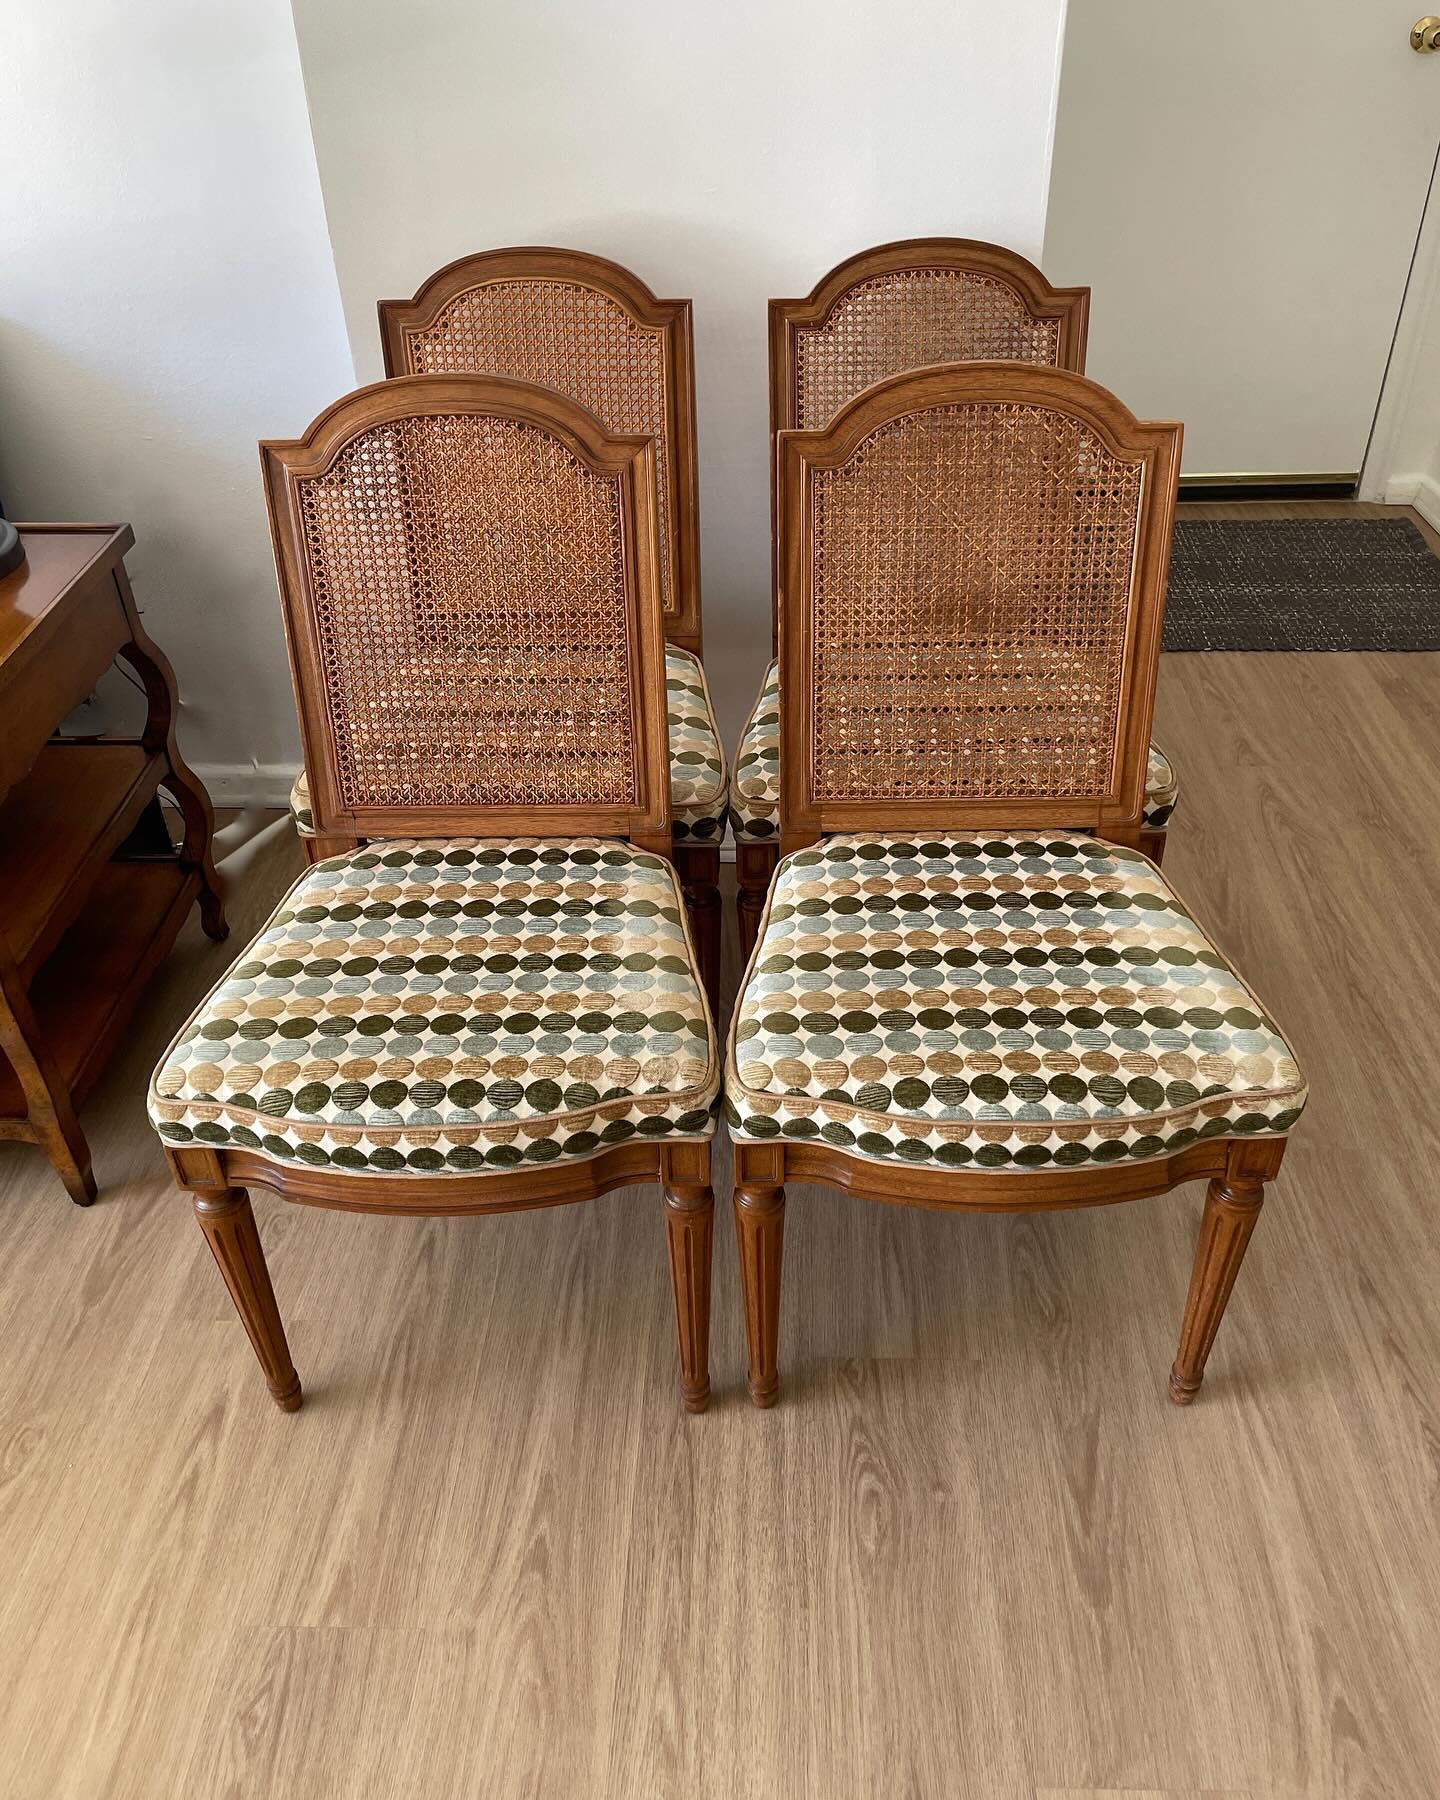 Spotted!  Vintage Henredon chairs with FUN fabric
.
.
.
.
.
@henredonfurniture
#henredonfurniture
#henredon #vintagehenredon
#henredonchairs
#vintagechairs 
#mixoldwithnew 
#gonegirlhome